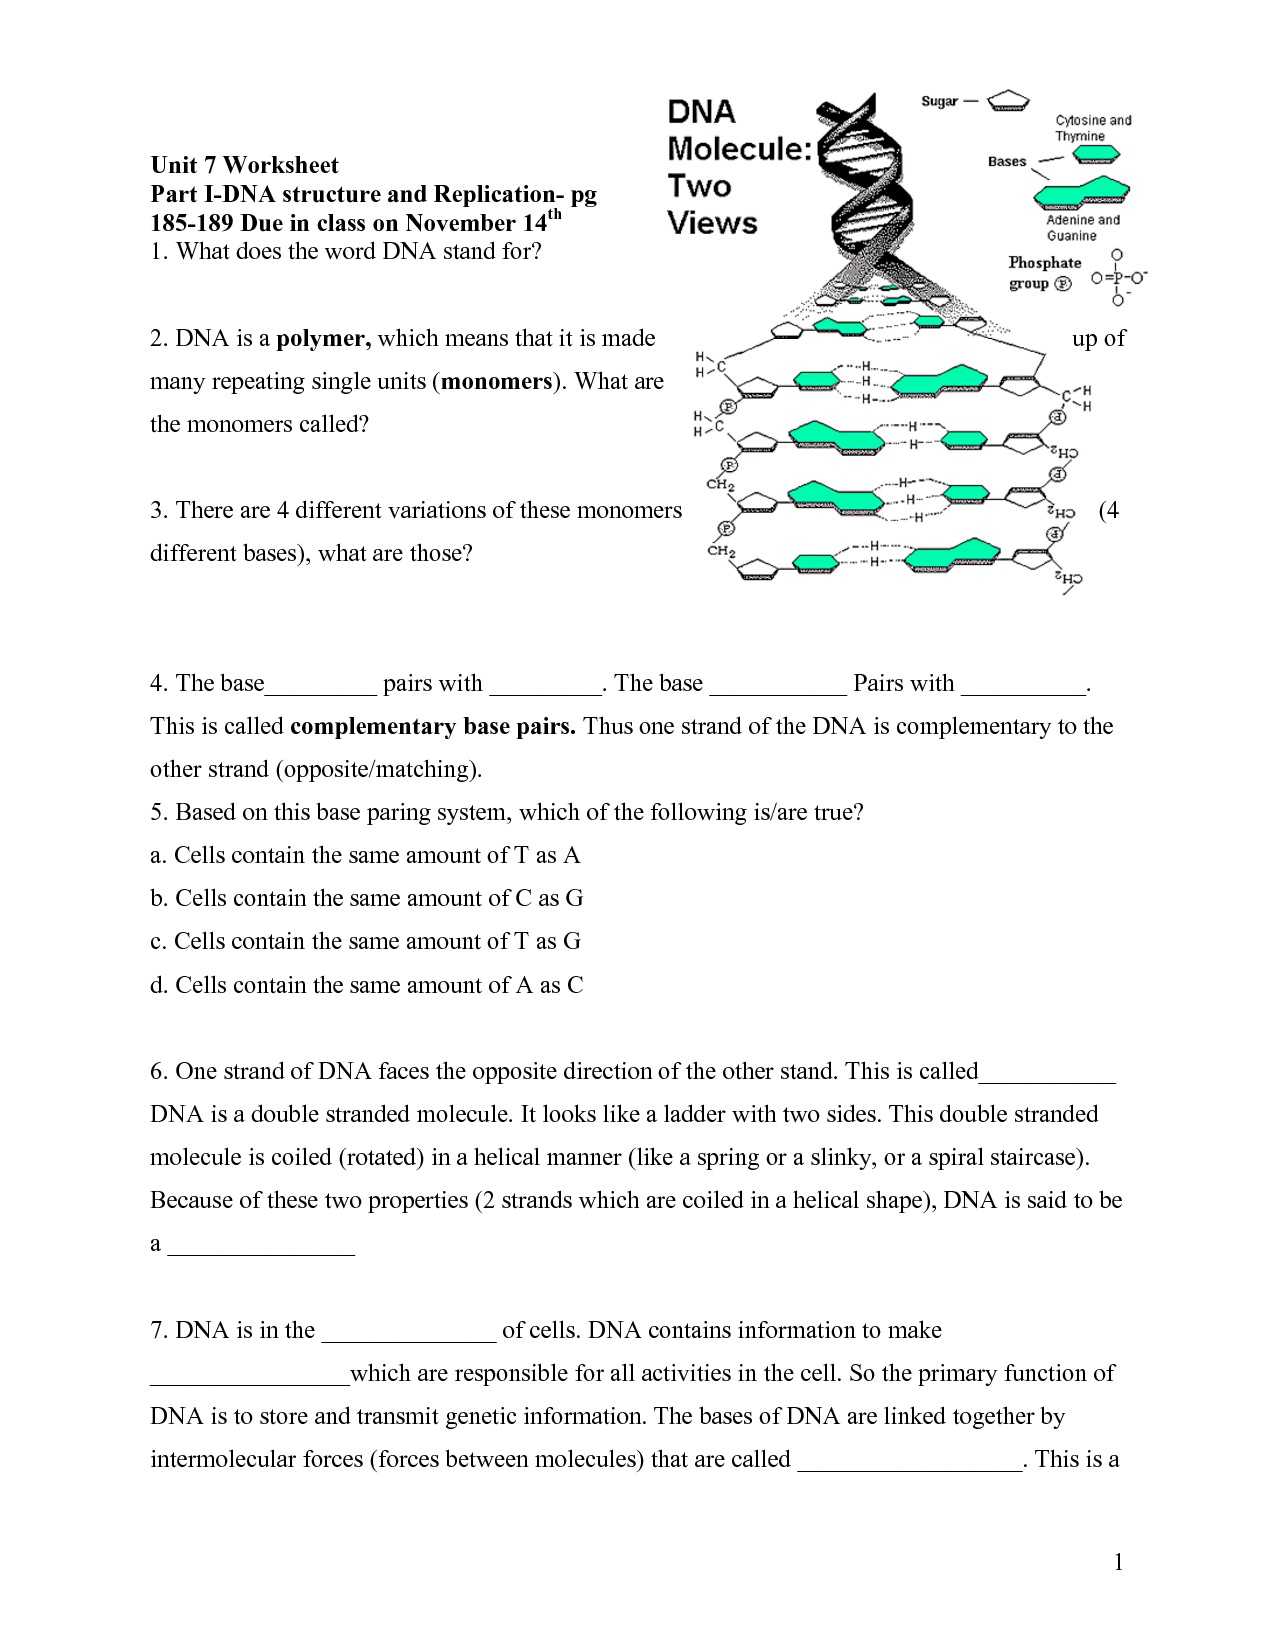 Dna Structure Worksheet Answer Key with Luxury Free Grammar Worksheets with Answers Dangling Modifiers